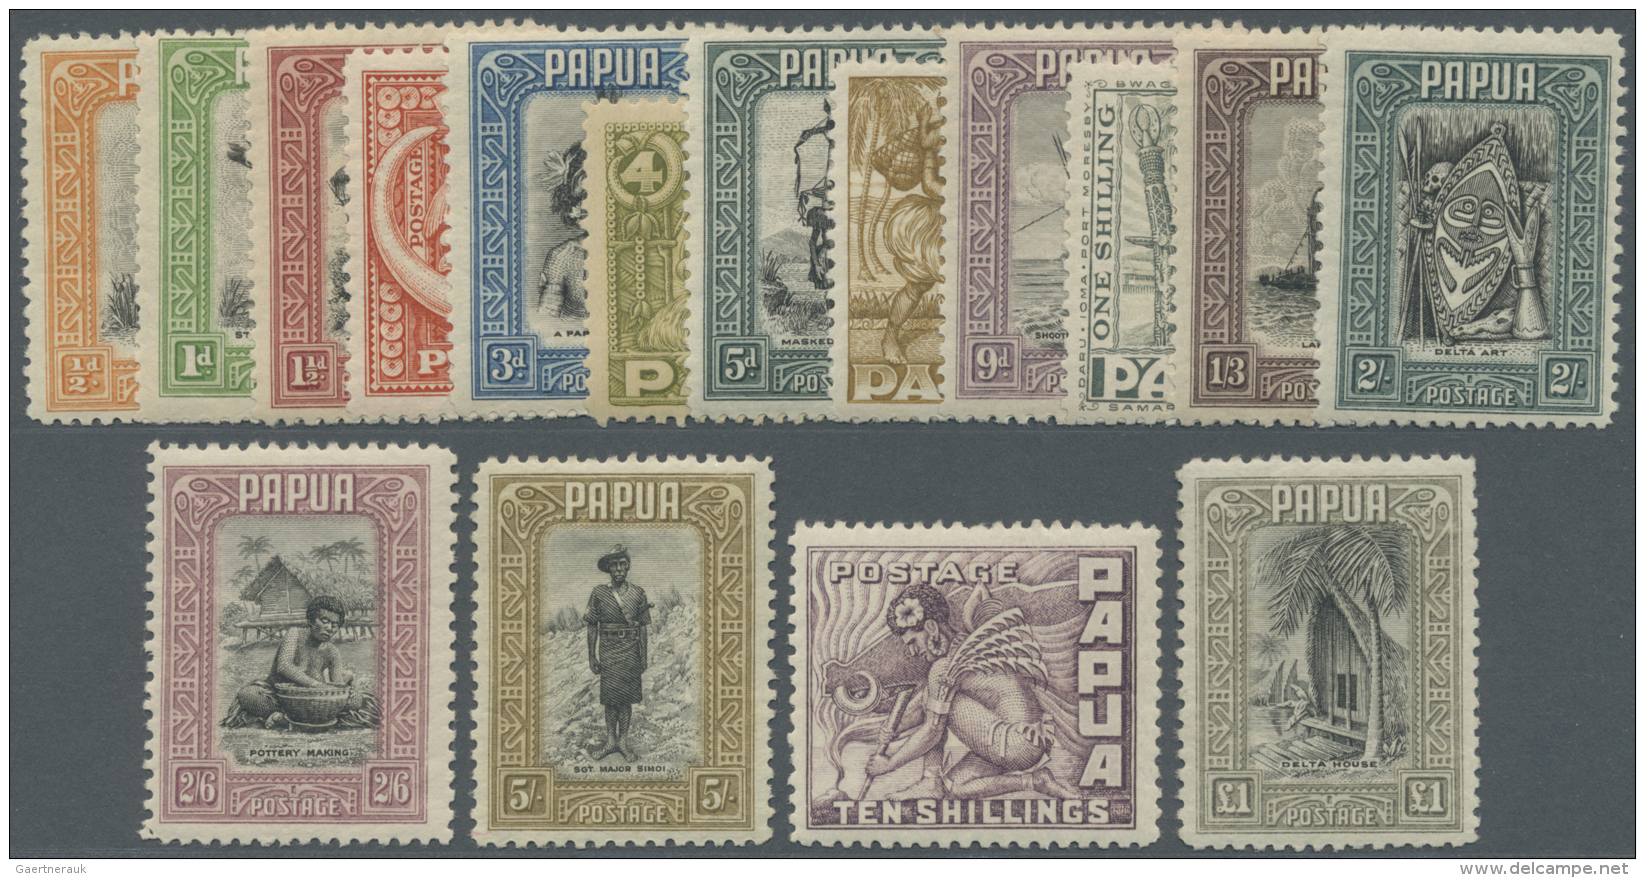 Papua: 1932, Pictorial Definitives Complete Set Of &pound;1, Mint Never Hinged, Scarce Set! SG. &pound; 550 For A Hinged - Papua New Guinea